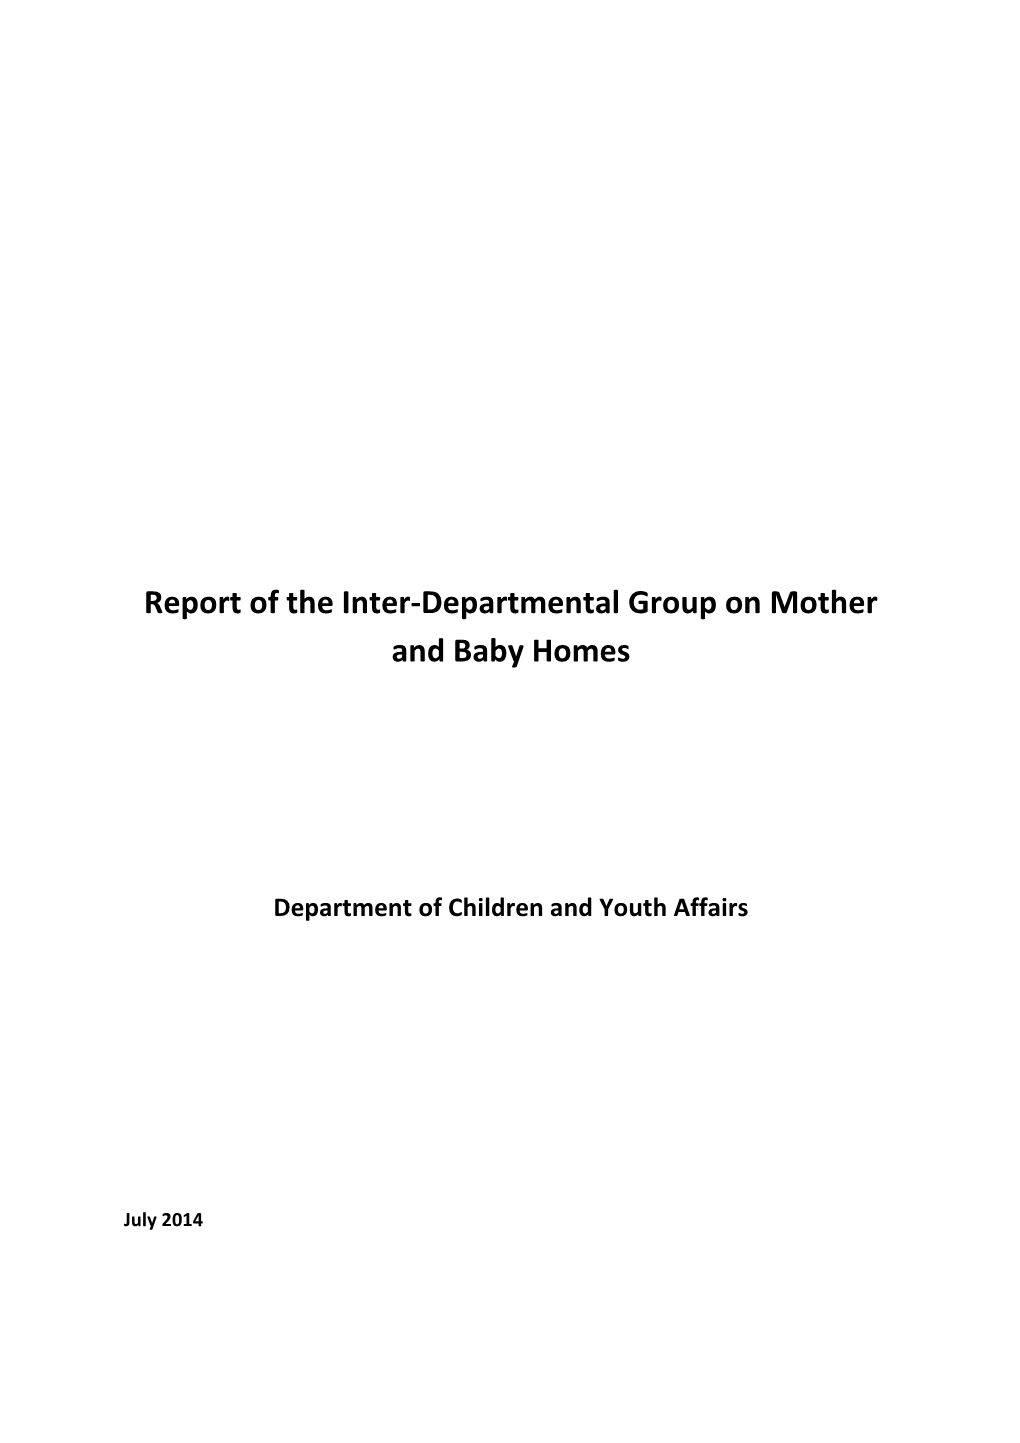 Report of the Inter-Departmental Group on Mother and Baby Homes